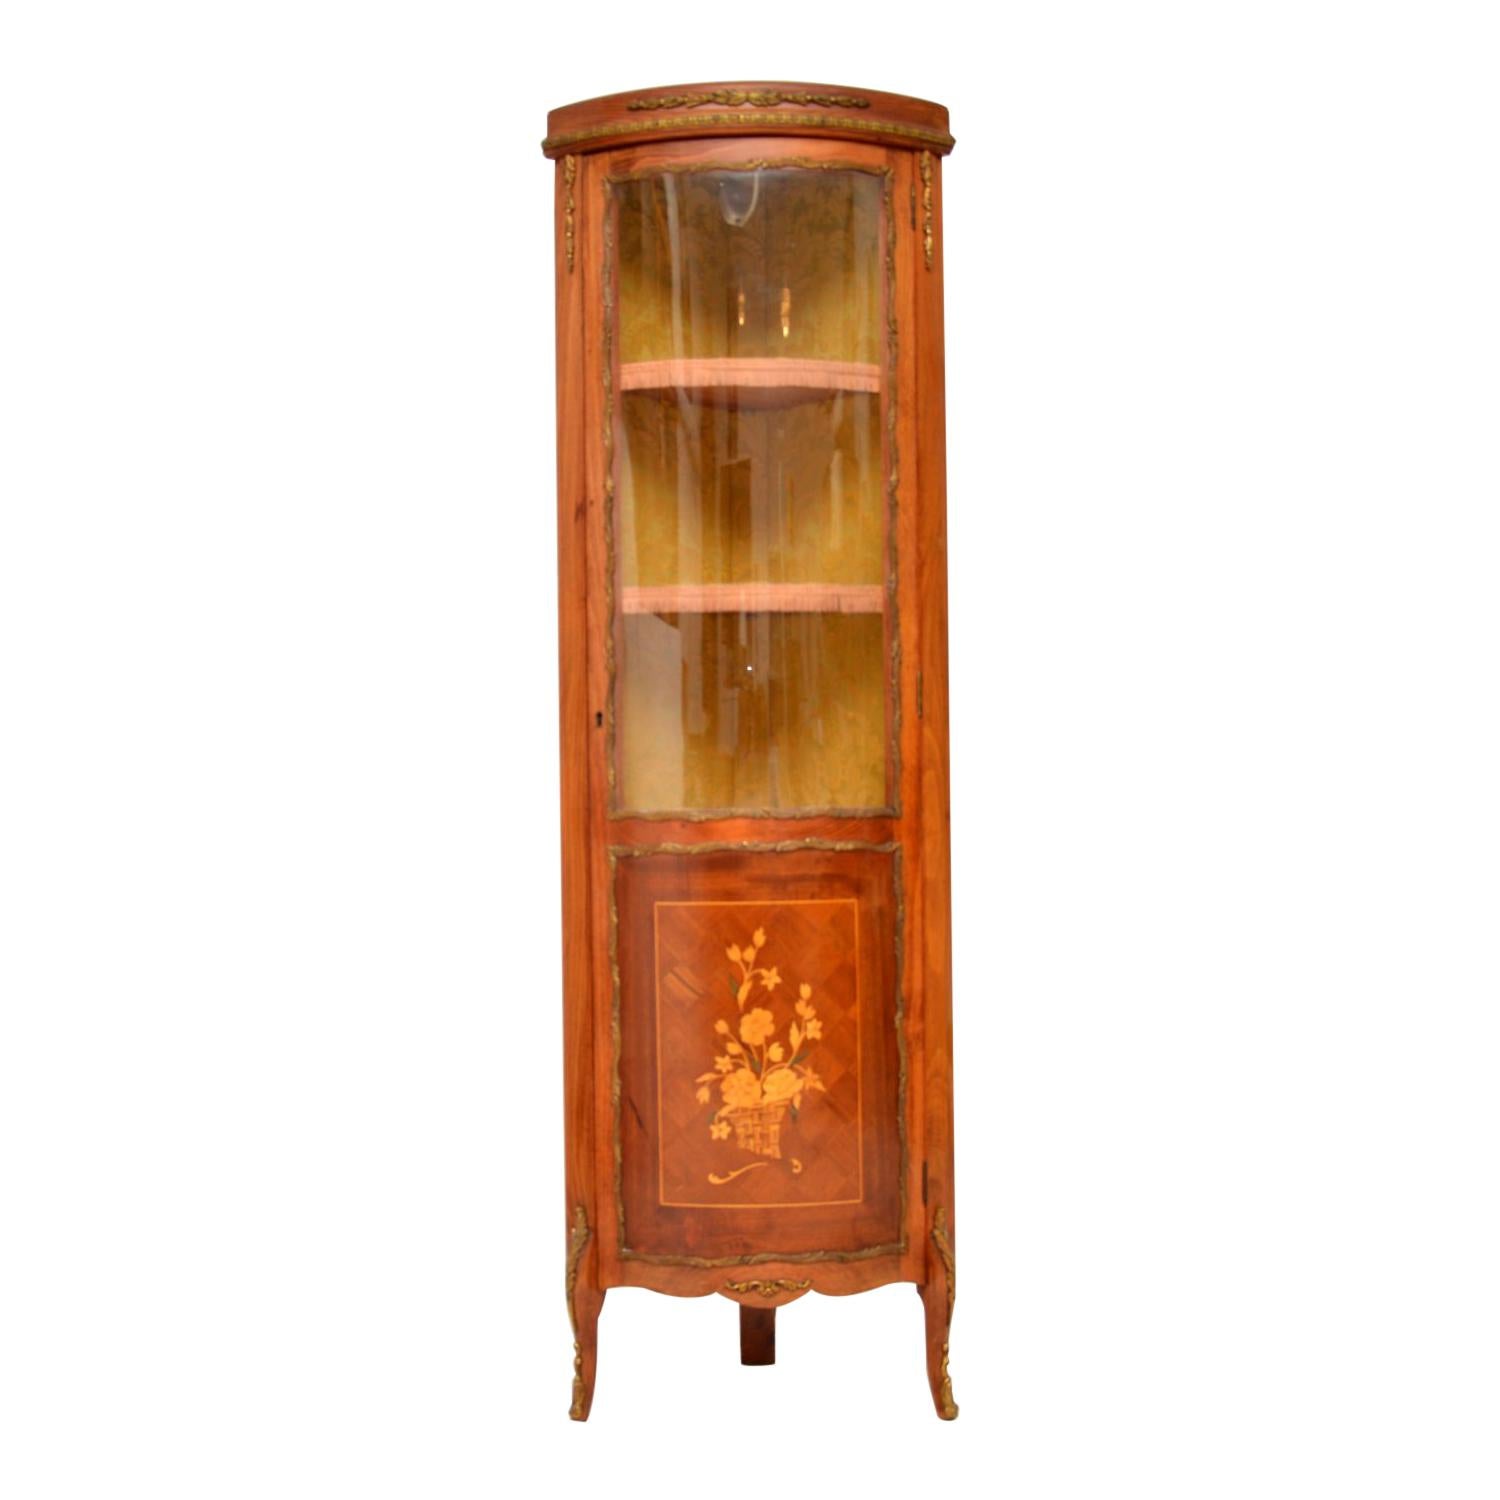 Antique French Inlaid Marquetry Corner Cabinet